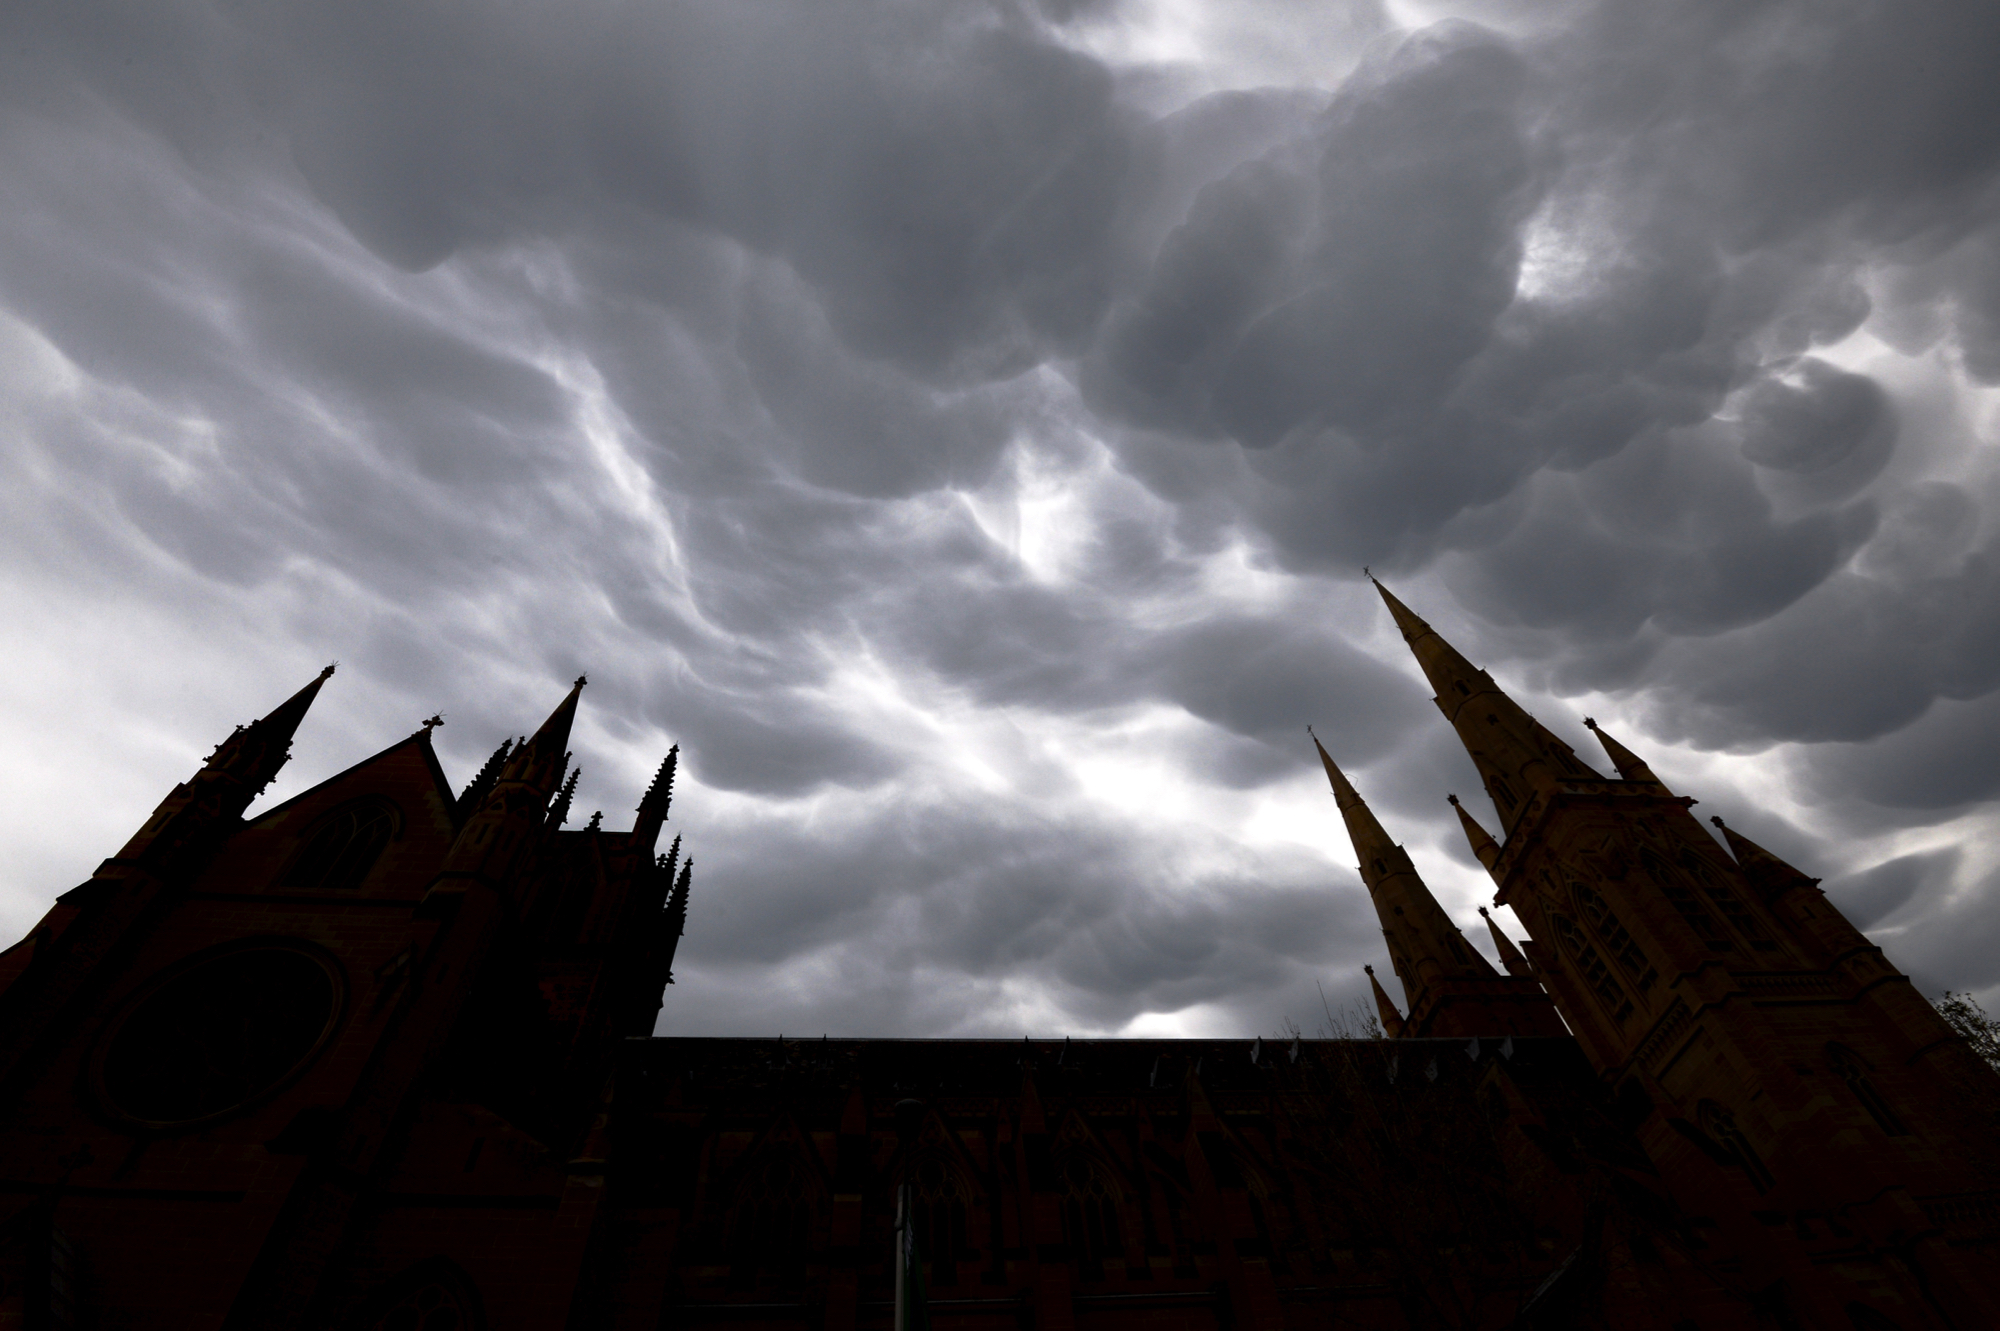 Debate over Church in Australia ‘moving to irrational extremes’